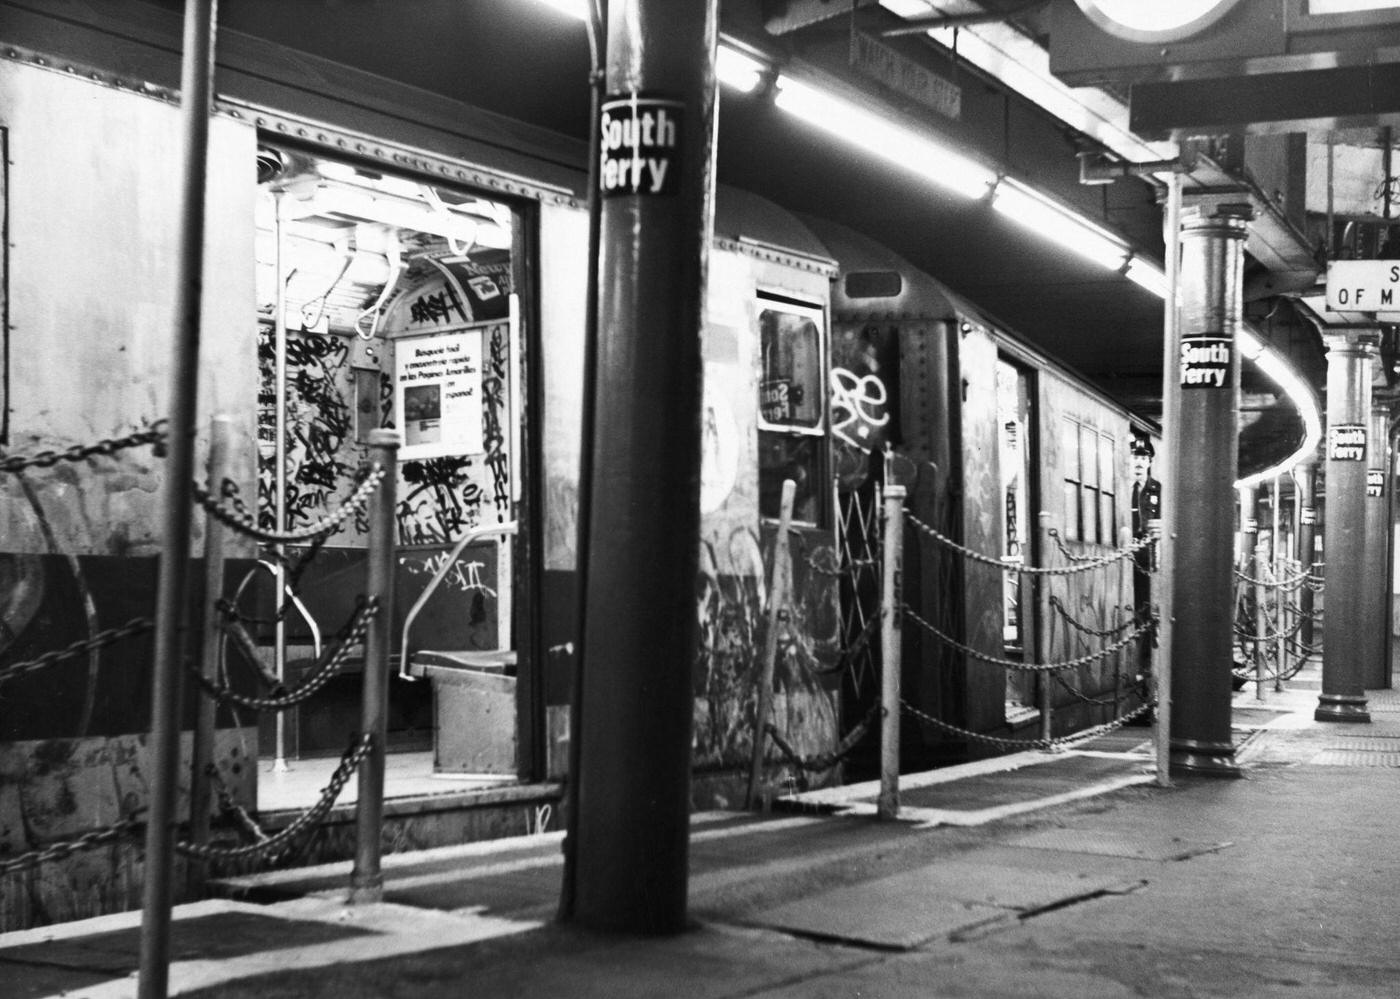 Graffiti-Covered Train At South Ferry Subway Station, Lower Manhattan, 1983